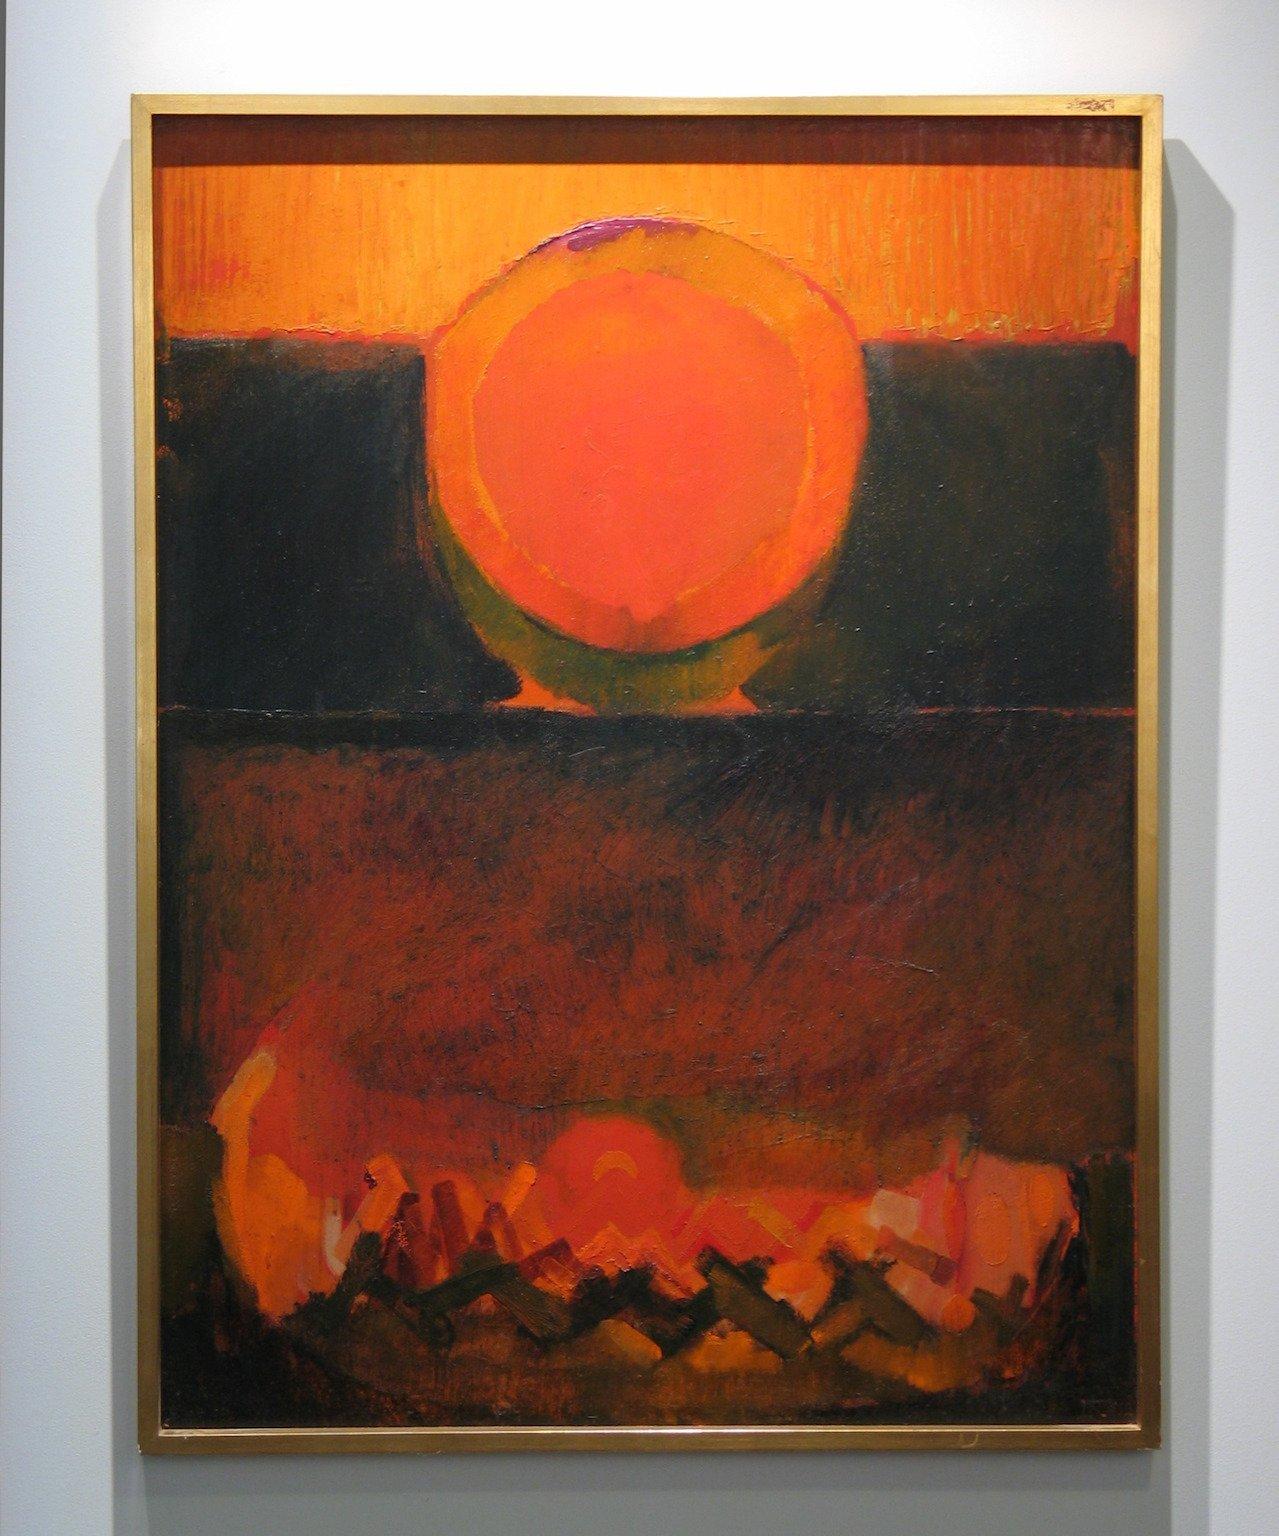 Solstice - Painting by Donald Laycock